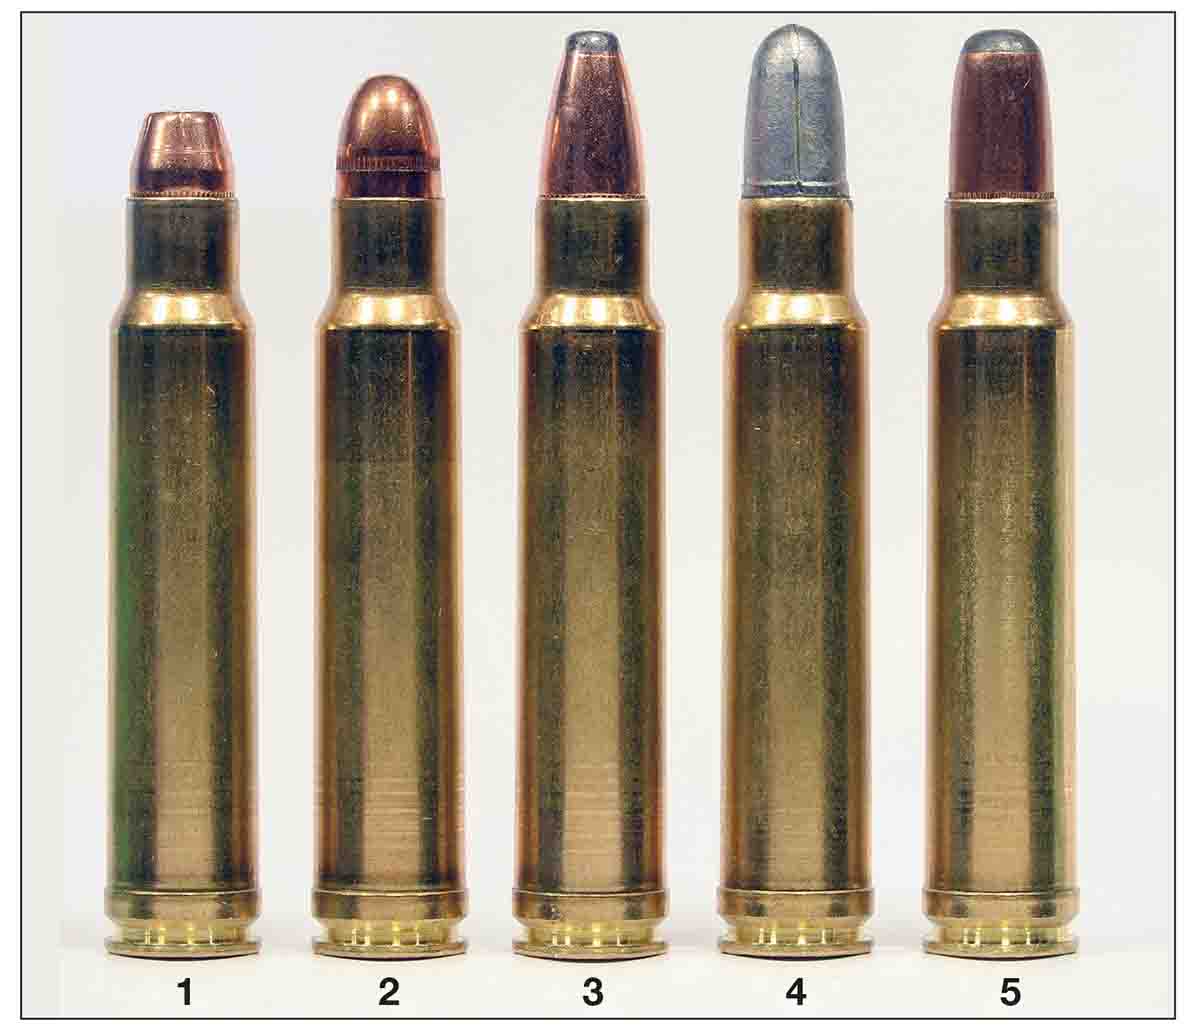 A cross-section of loads for the .358 Norma Magnum include the (1) Sierra 125-grain JHP, (2) Sierra 170 FMJ, (3) Speer 180, (4) 200-grain cast bullet and a (5) Sierra 200 roundnose.